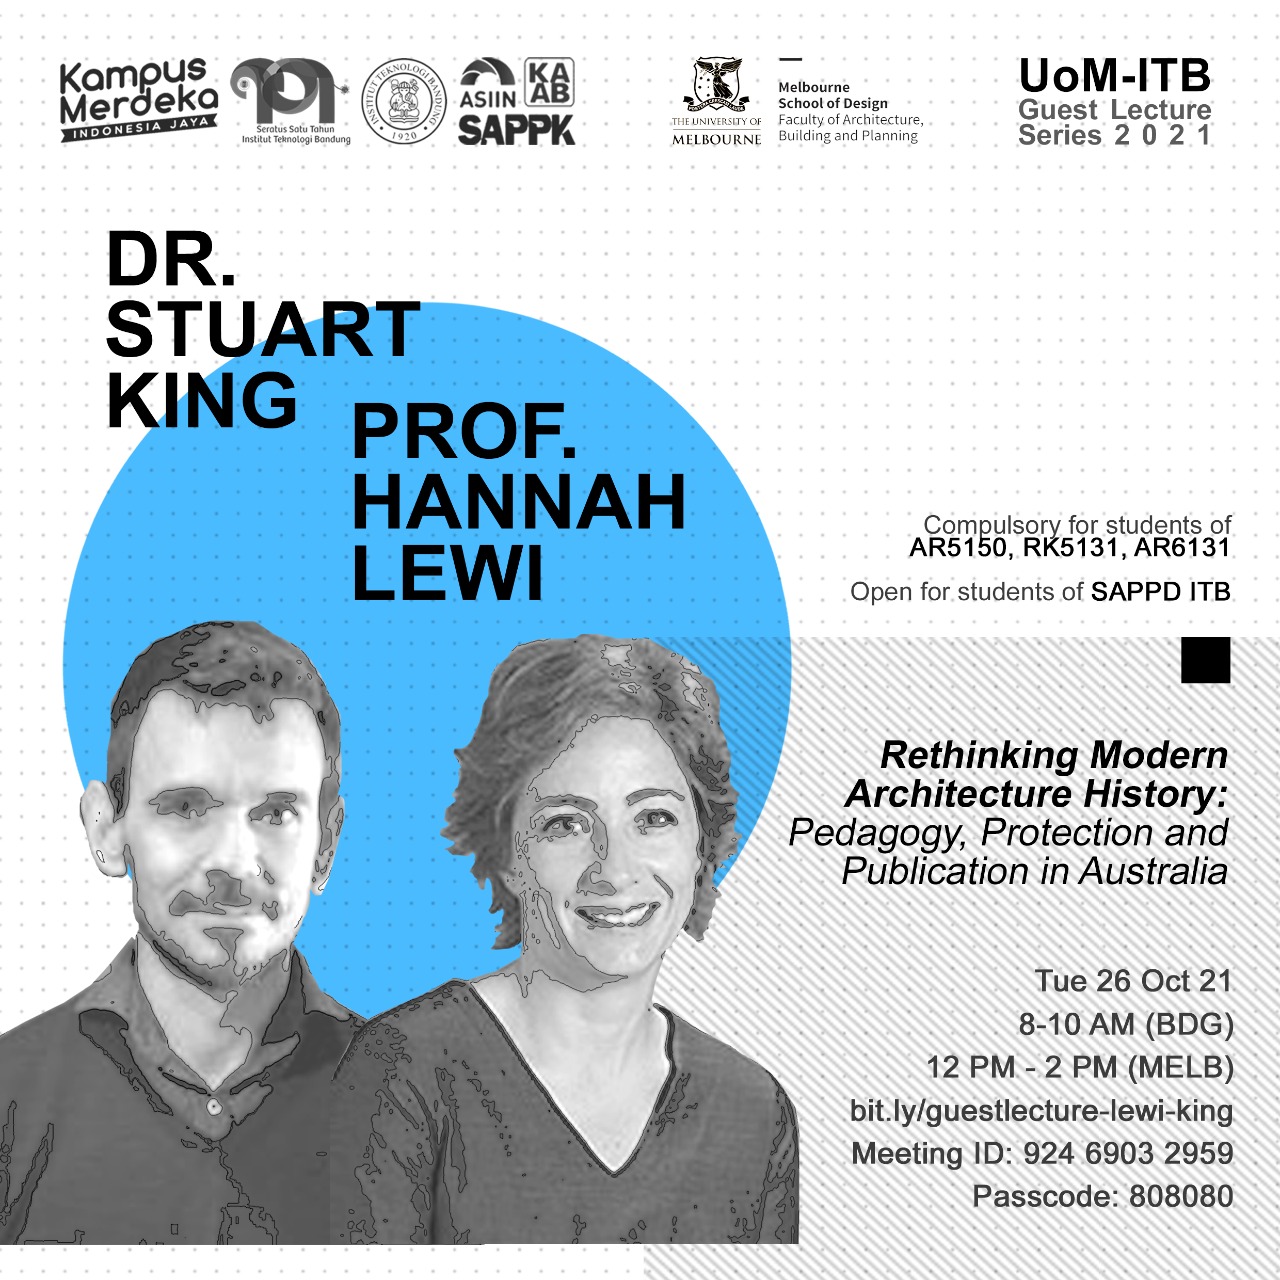 UOM-ITB GUEST LECTURE SERIES 2021: RETHINKING MODERN ARCHITECTURE HISTORY: PEDAGOGY, PROTECTION AND PUBLICATION IN AUSTRALIA